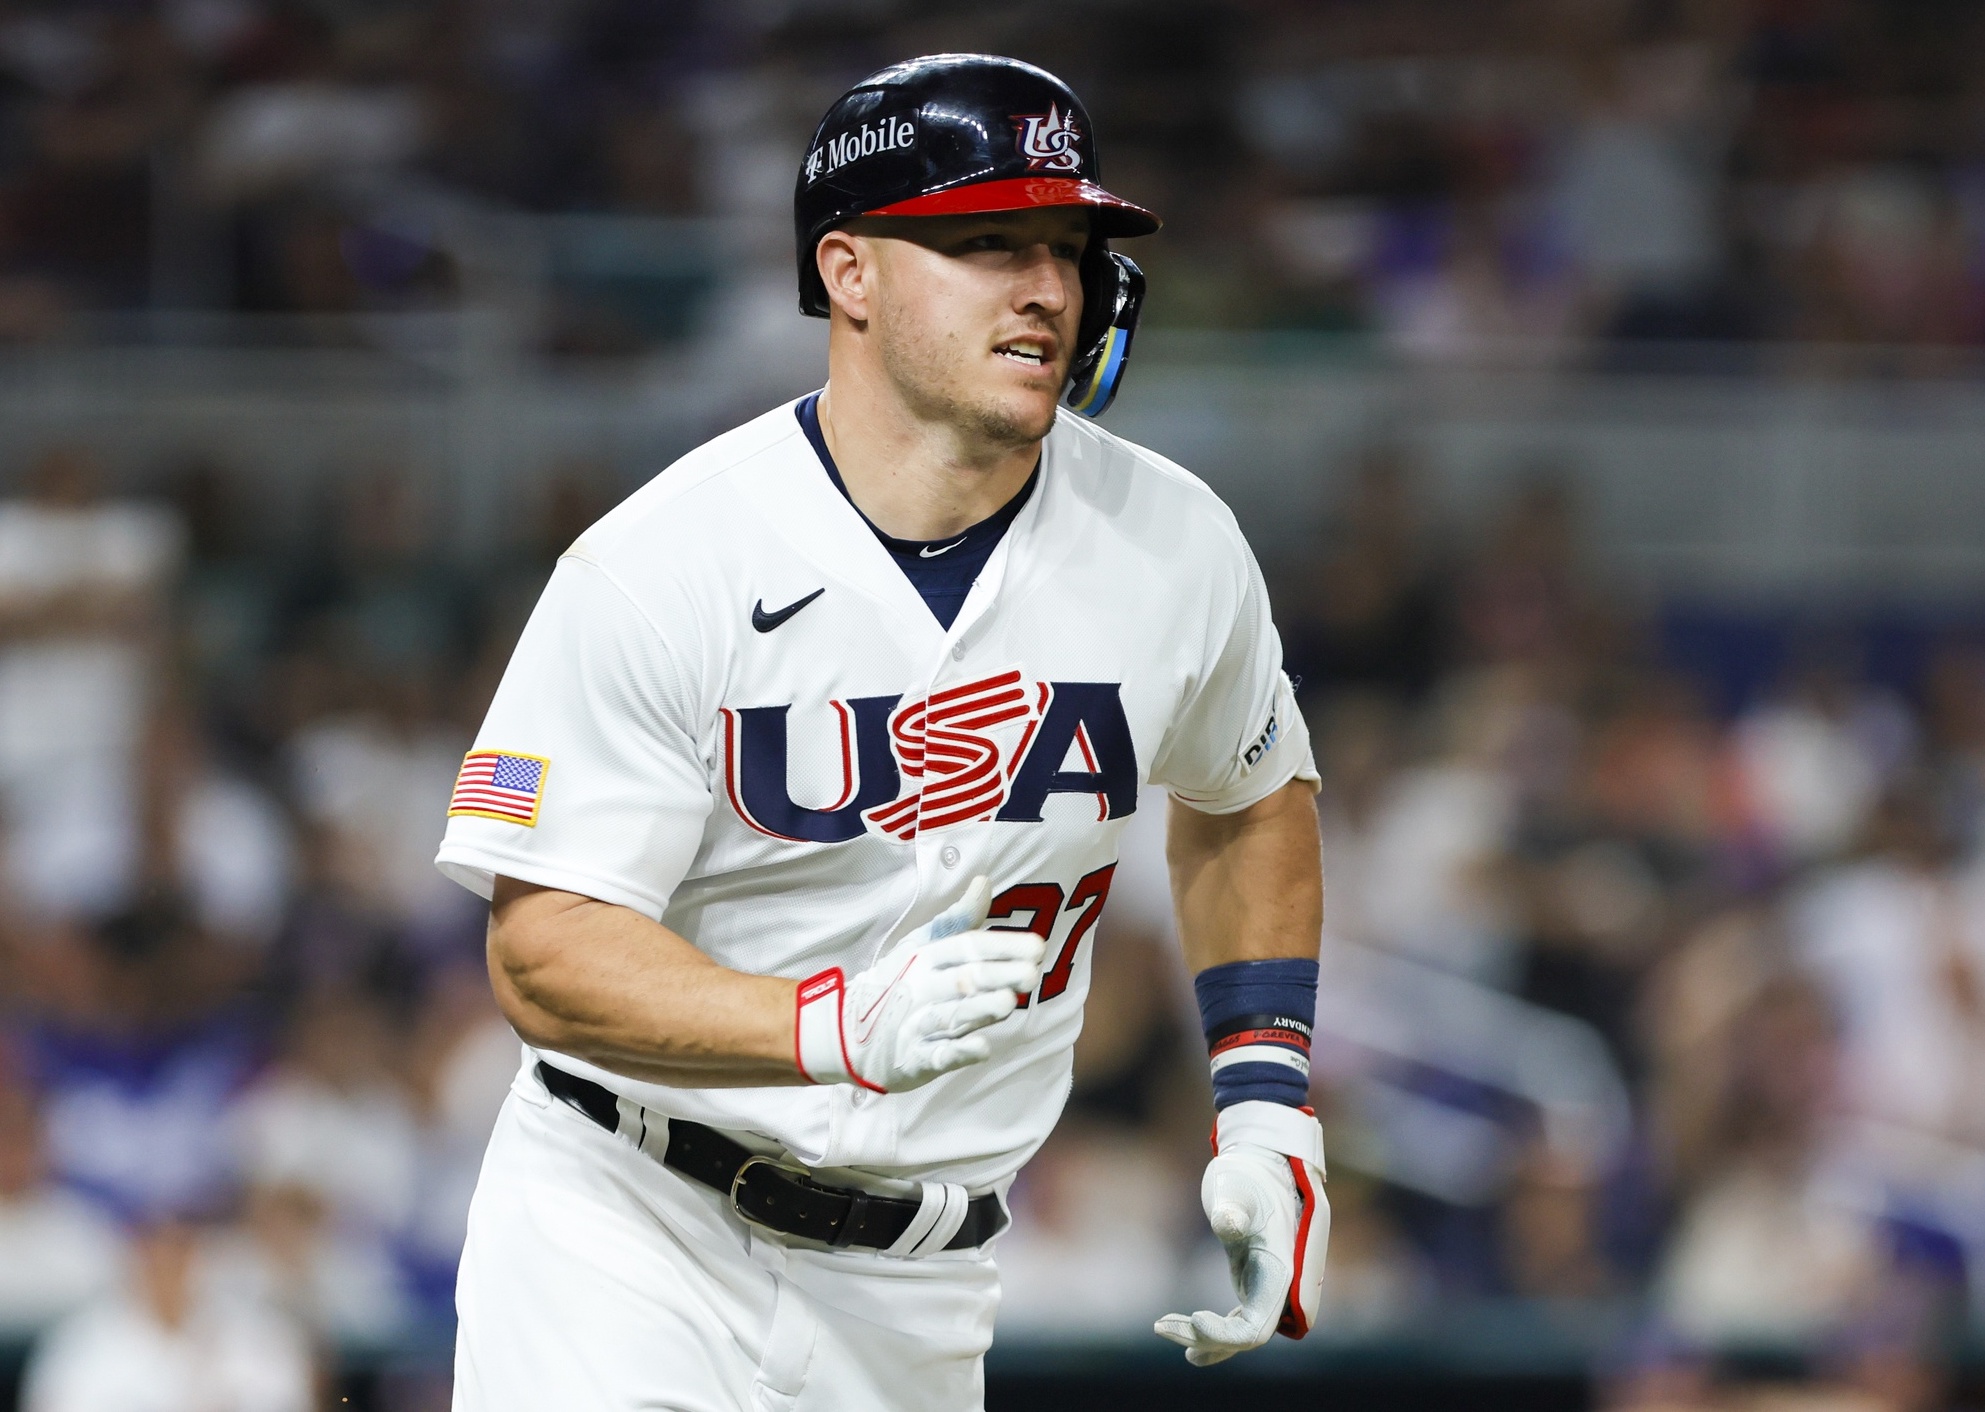 Mike Trout & Team USA Heading To World Baseball Classic